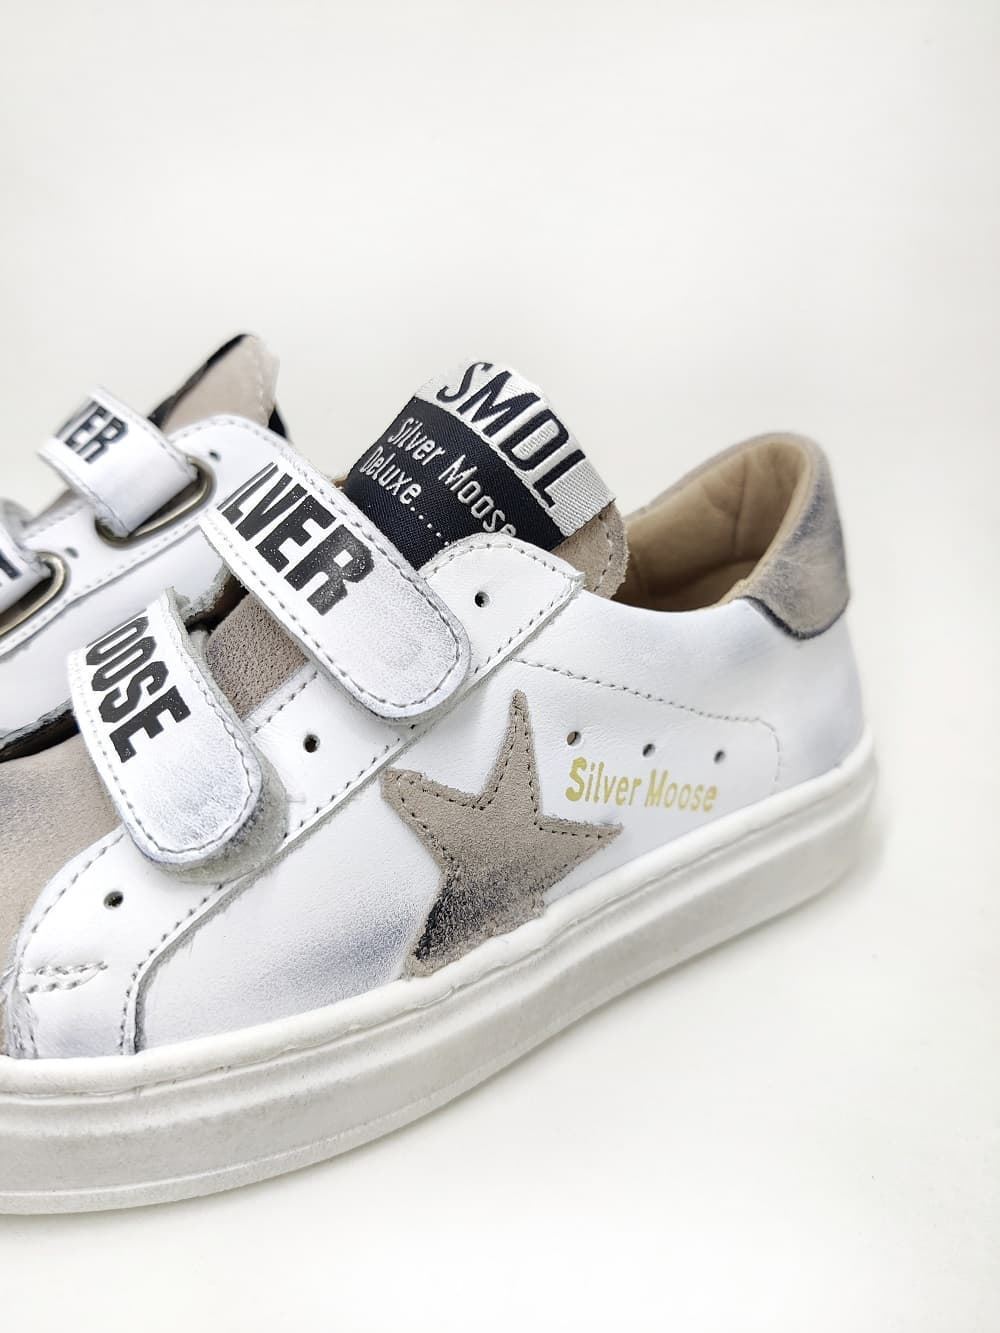 Golden Star Sneakers in White Taupe leather with Velcro - Image 4